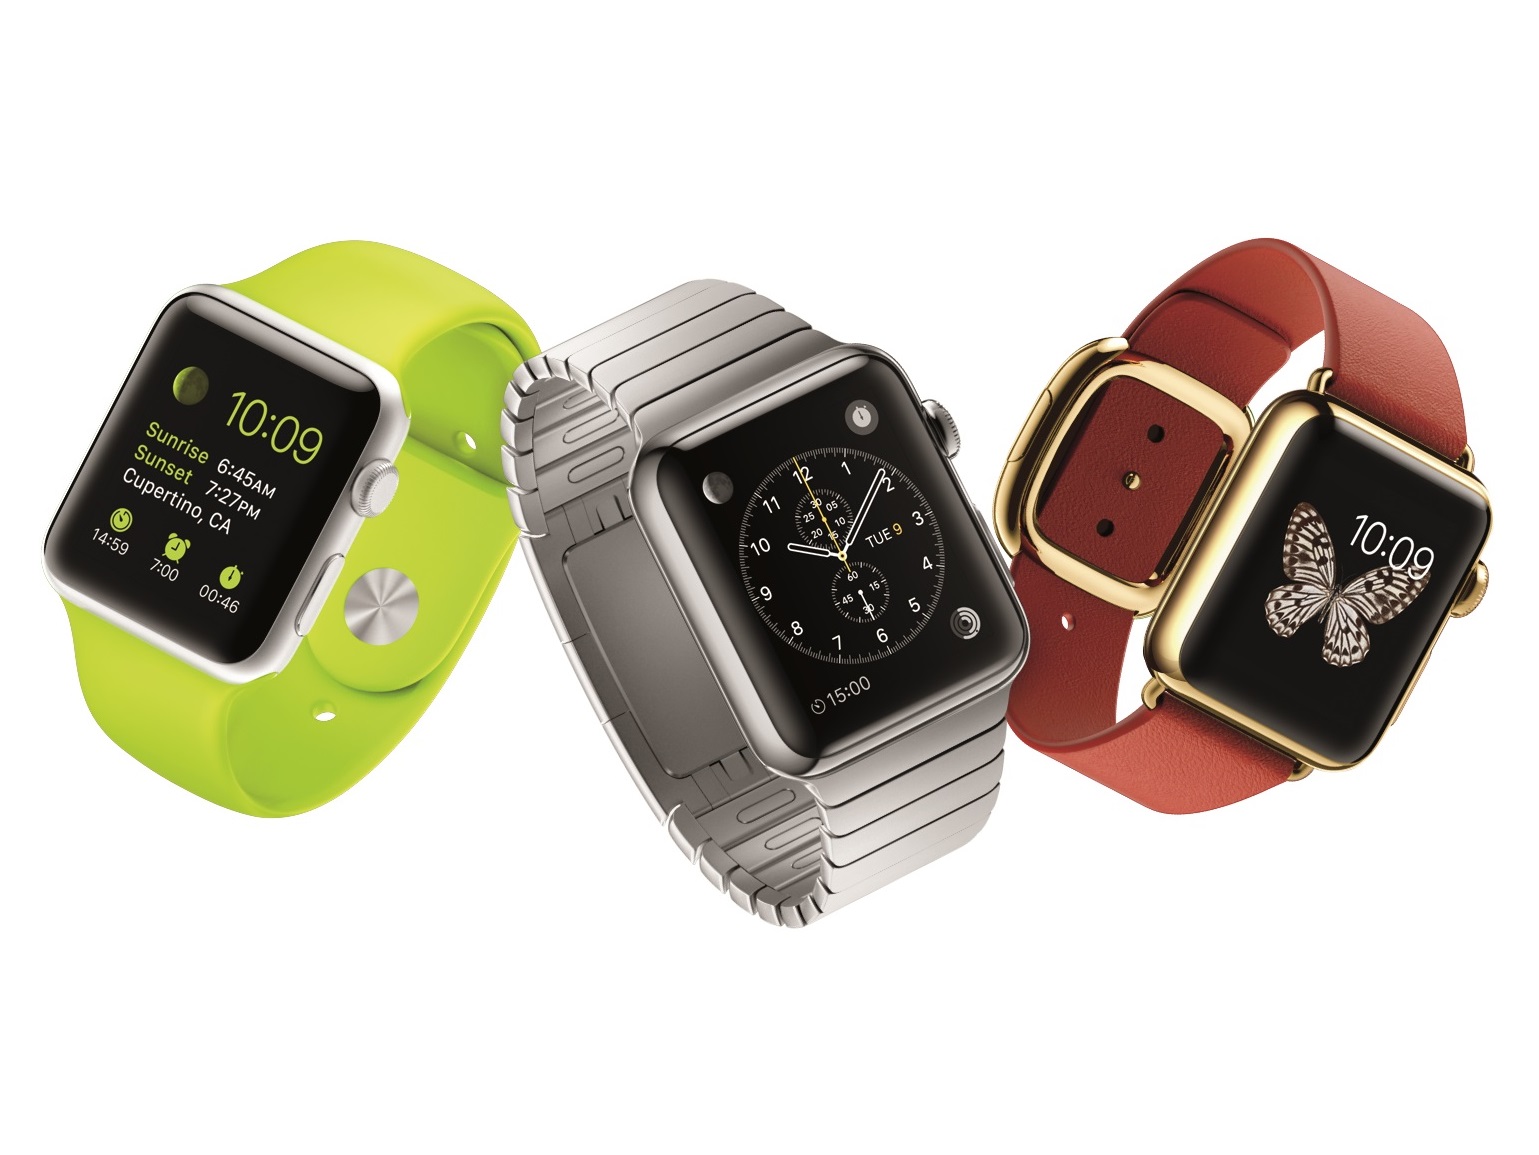 Why I’m Probably Not Buying The Apple Watch